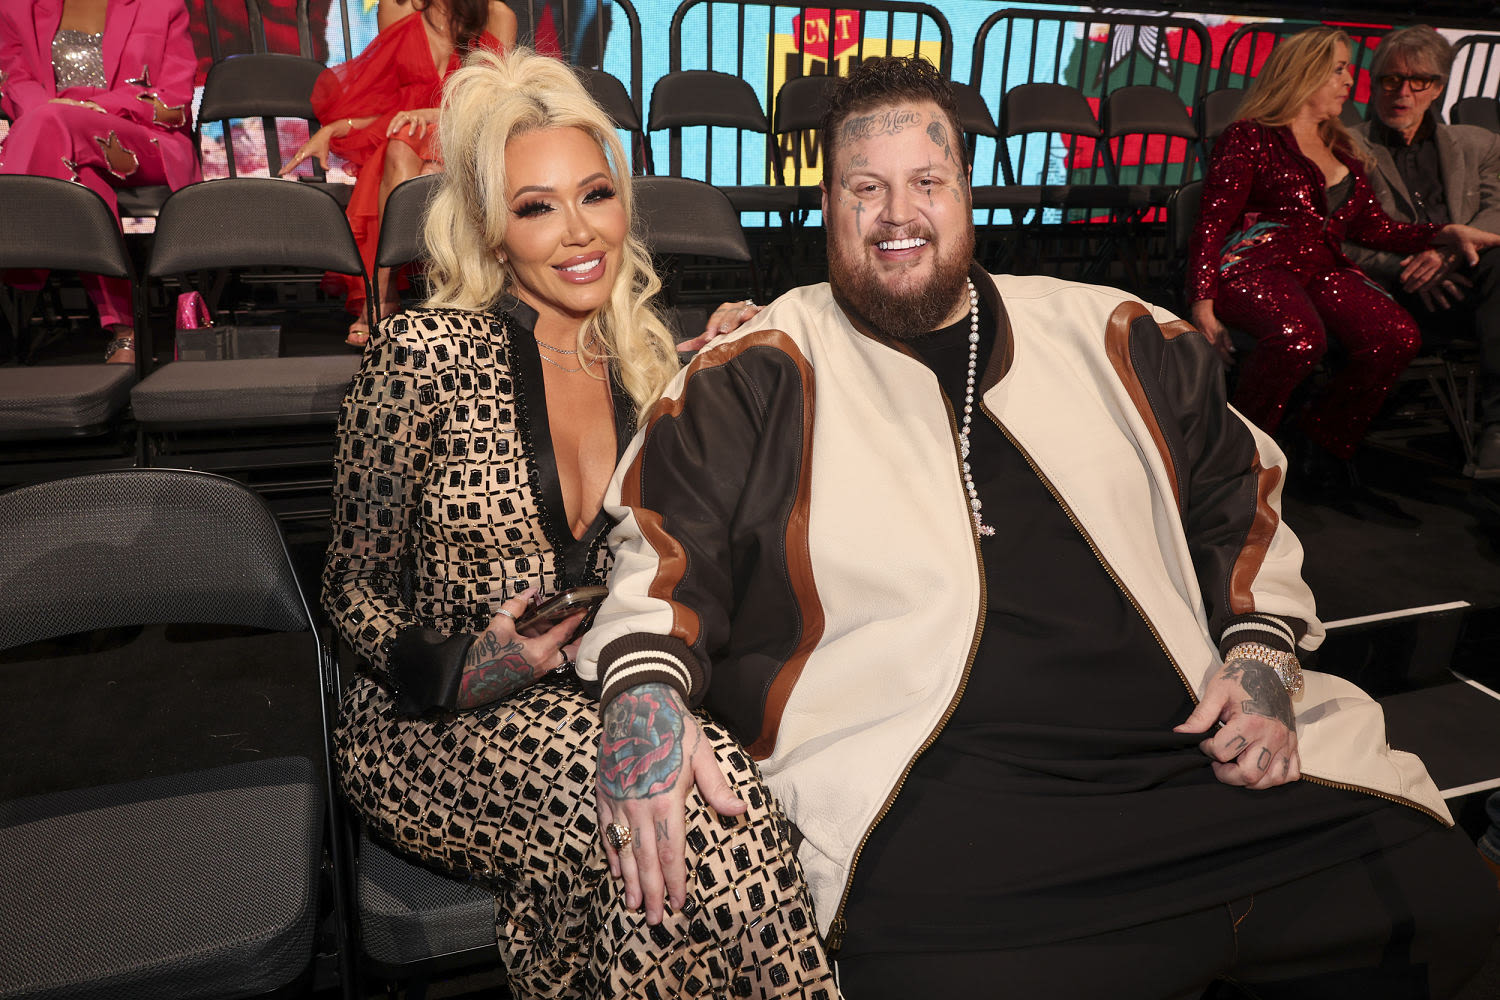 Bunnie XO and Jelly Roll announce plans to have a baby using IVF